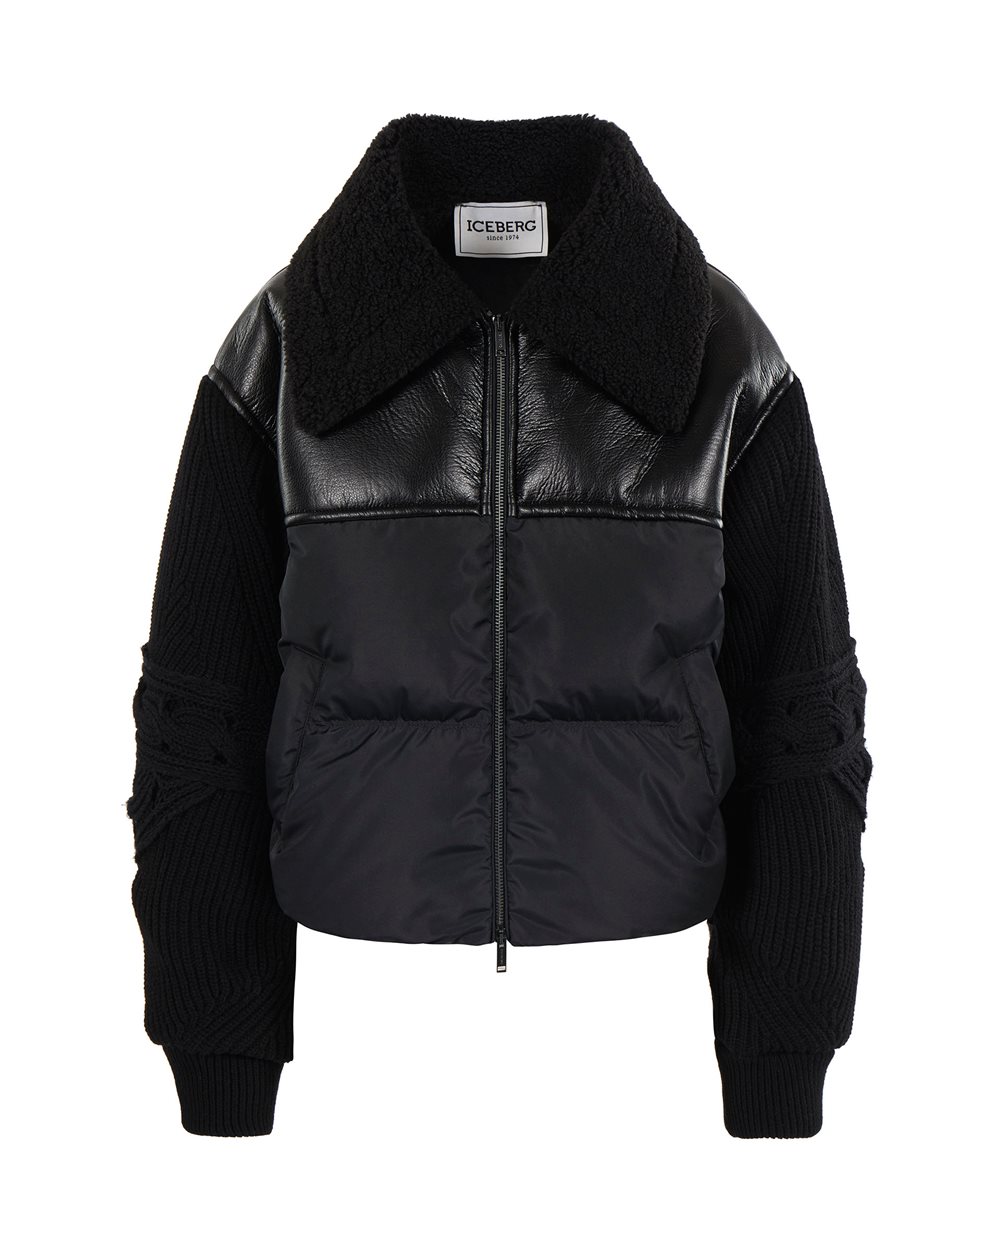 Padded down jacket in different fabrics - per abilitare | Iceberg - Official Website